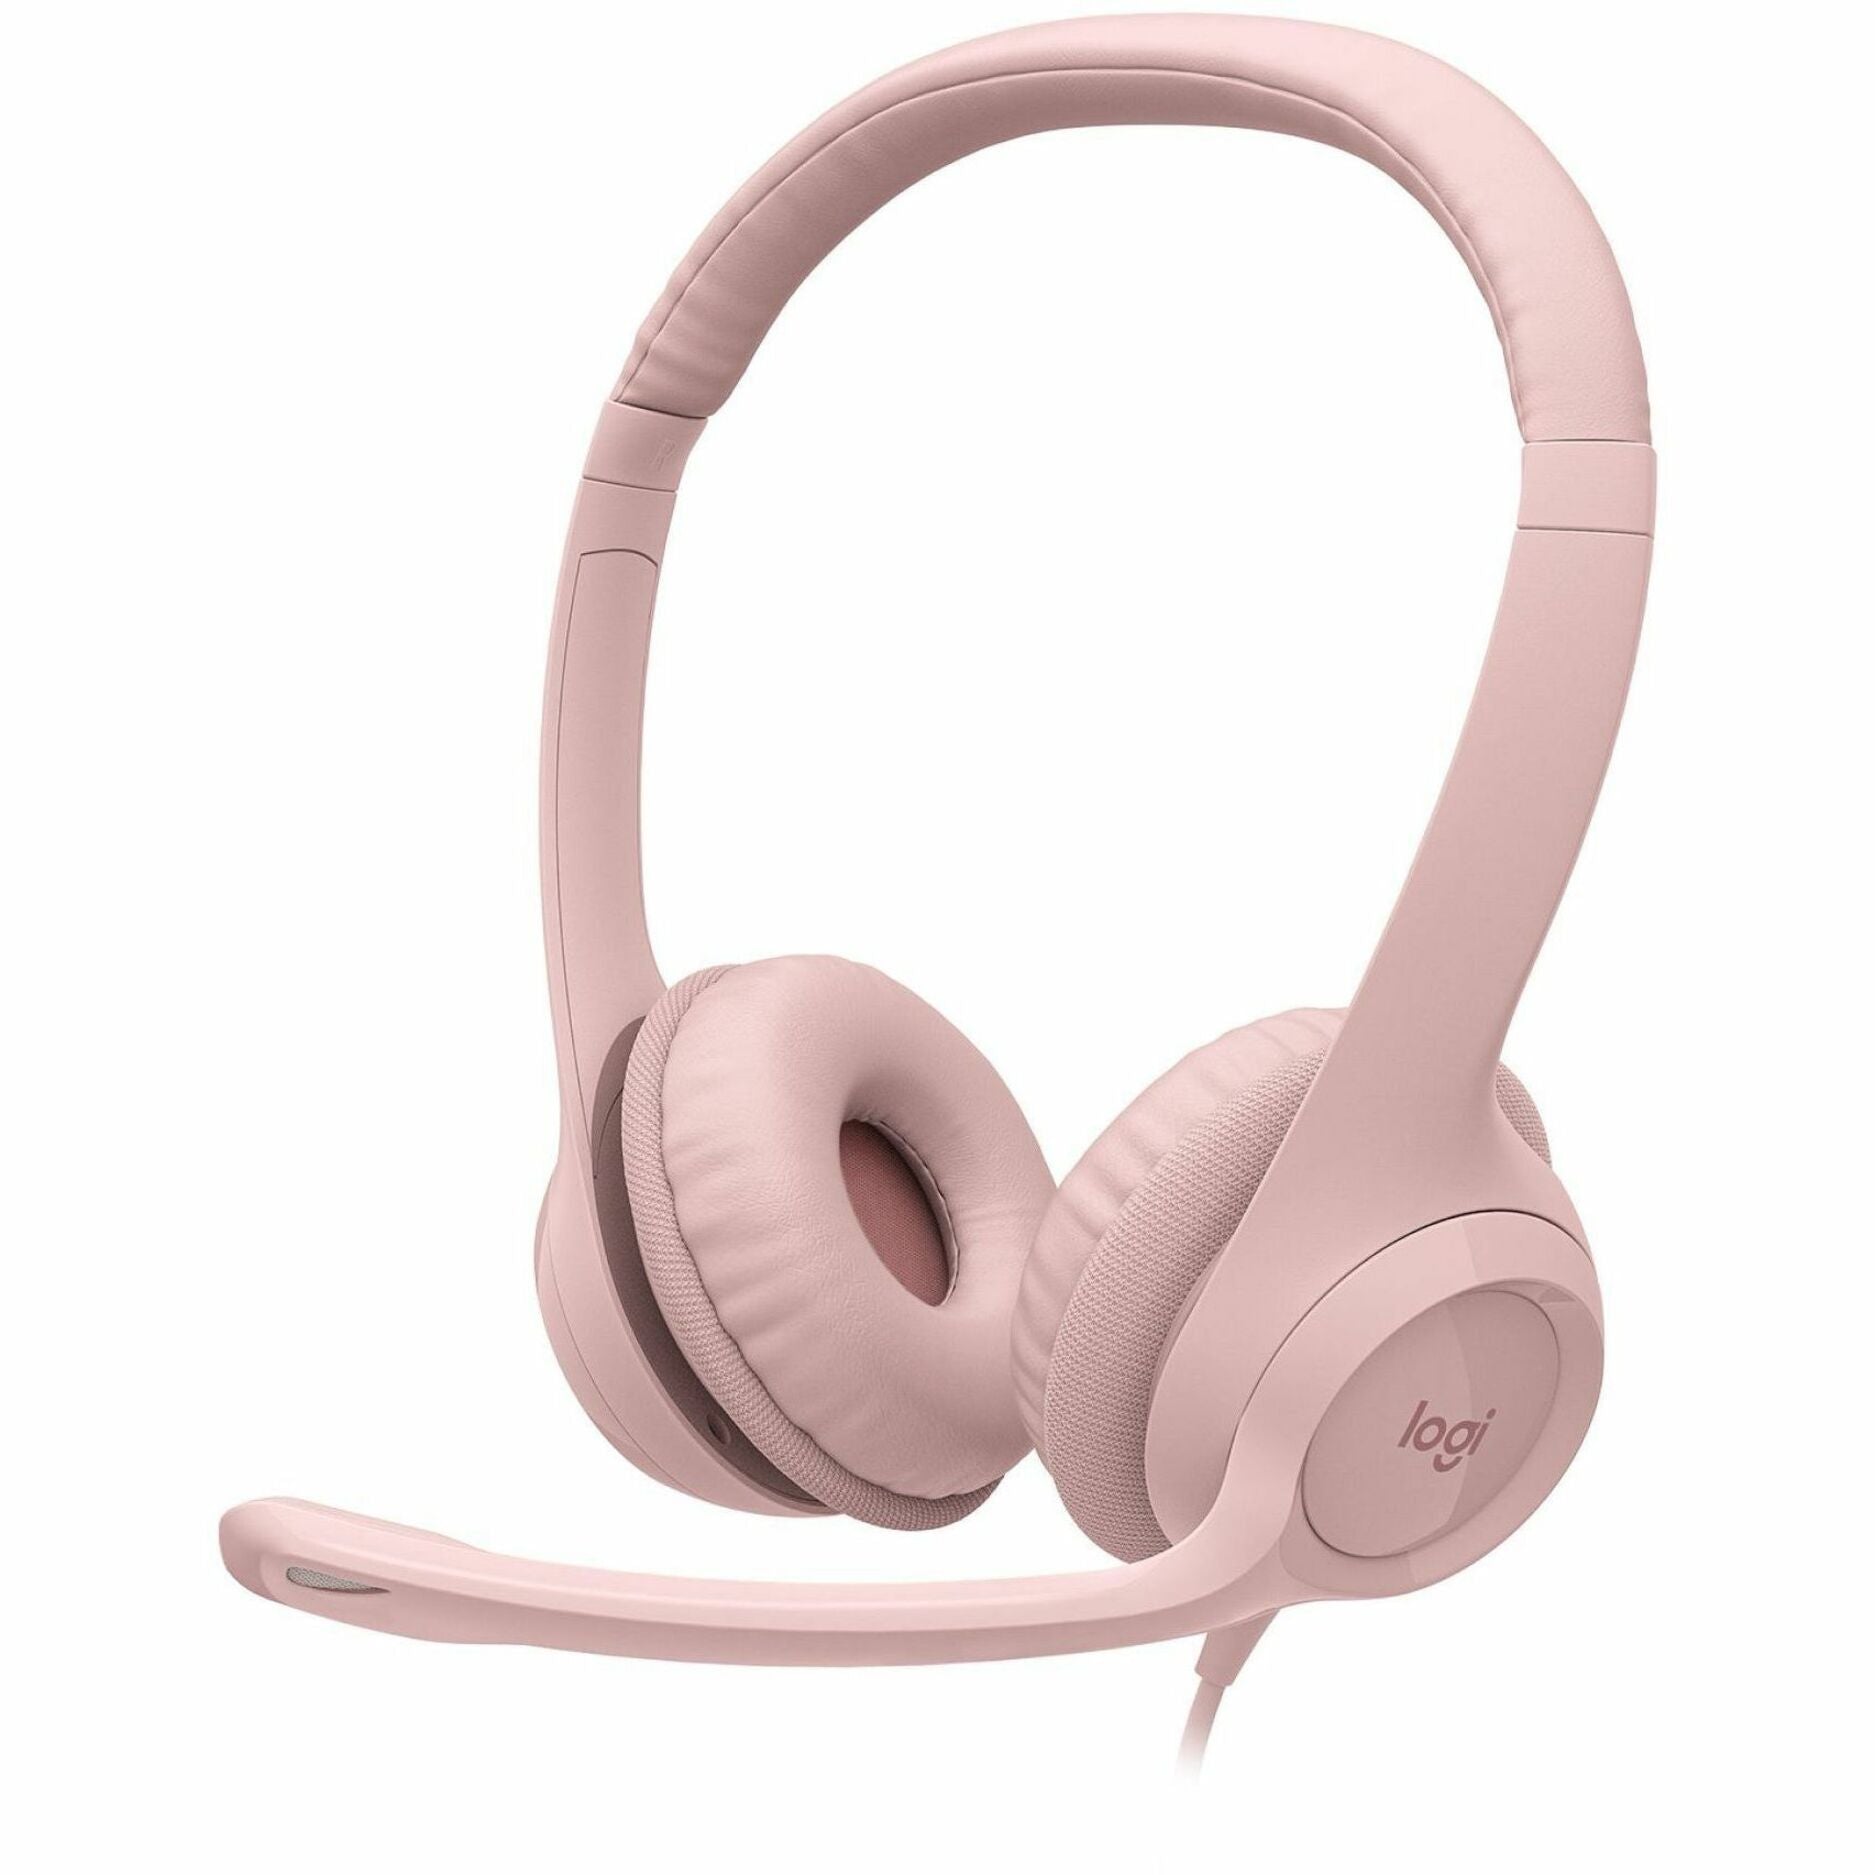 Logitech 981-001280 H390 USB-A Computer Headset, Rose - Adjustable Headband, Comfortable, Noise Cancelling, Plug and Play